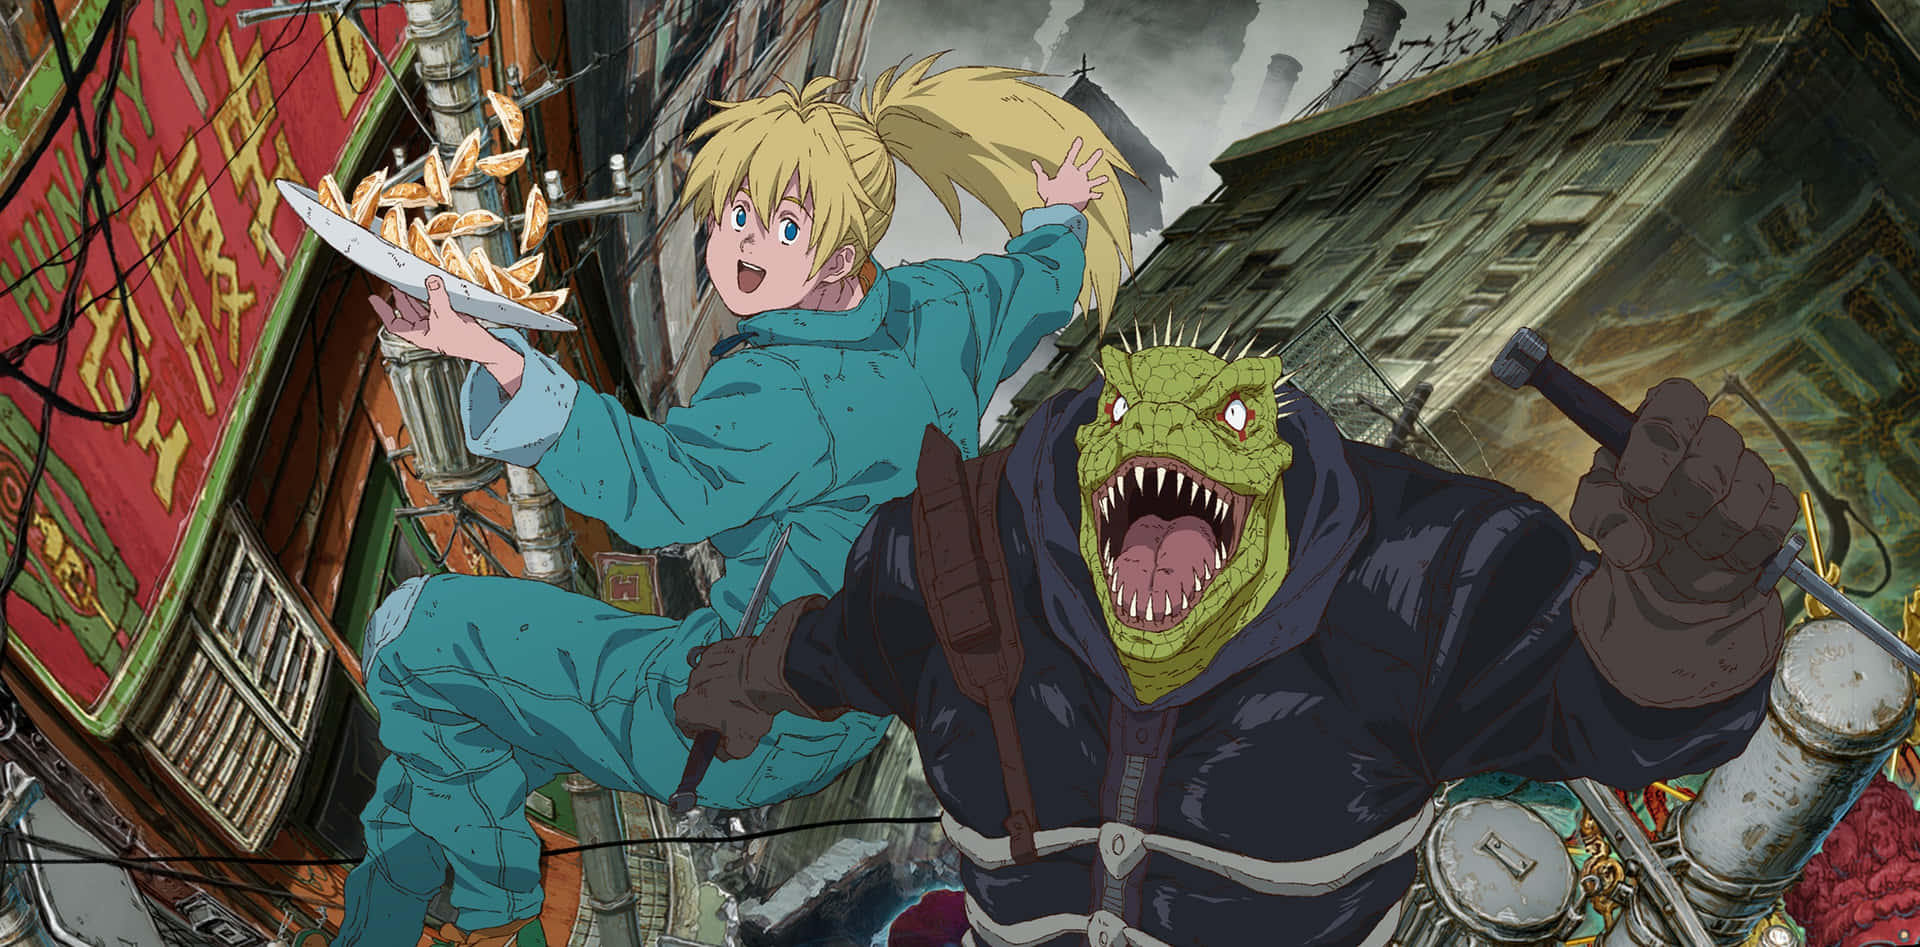 "Discover the magical world of Dorohedoro today!" Wallpaper